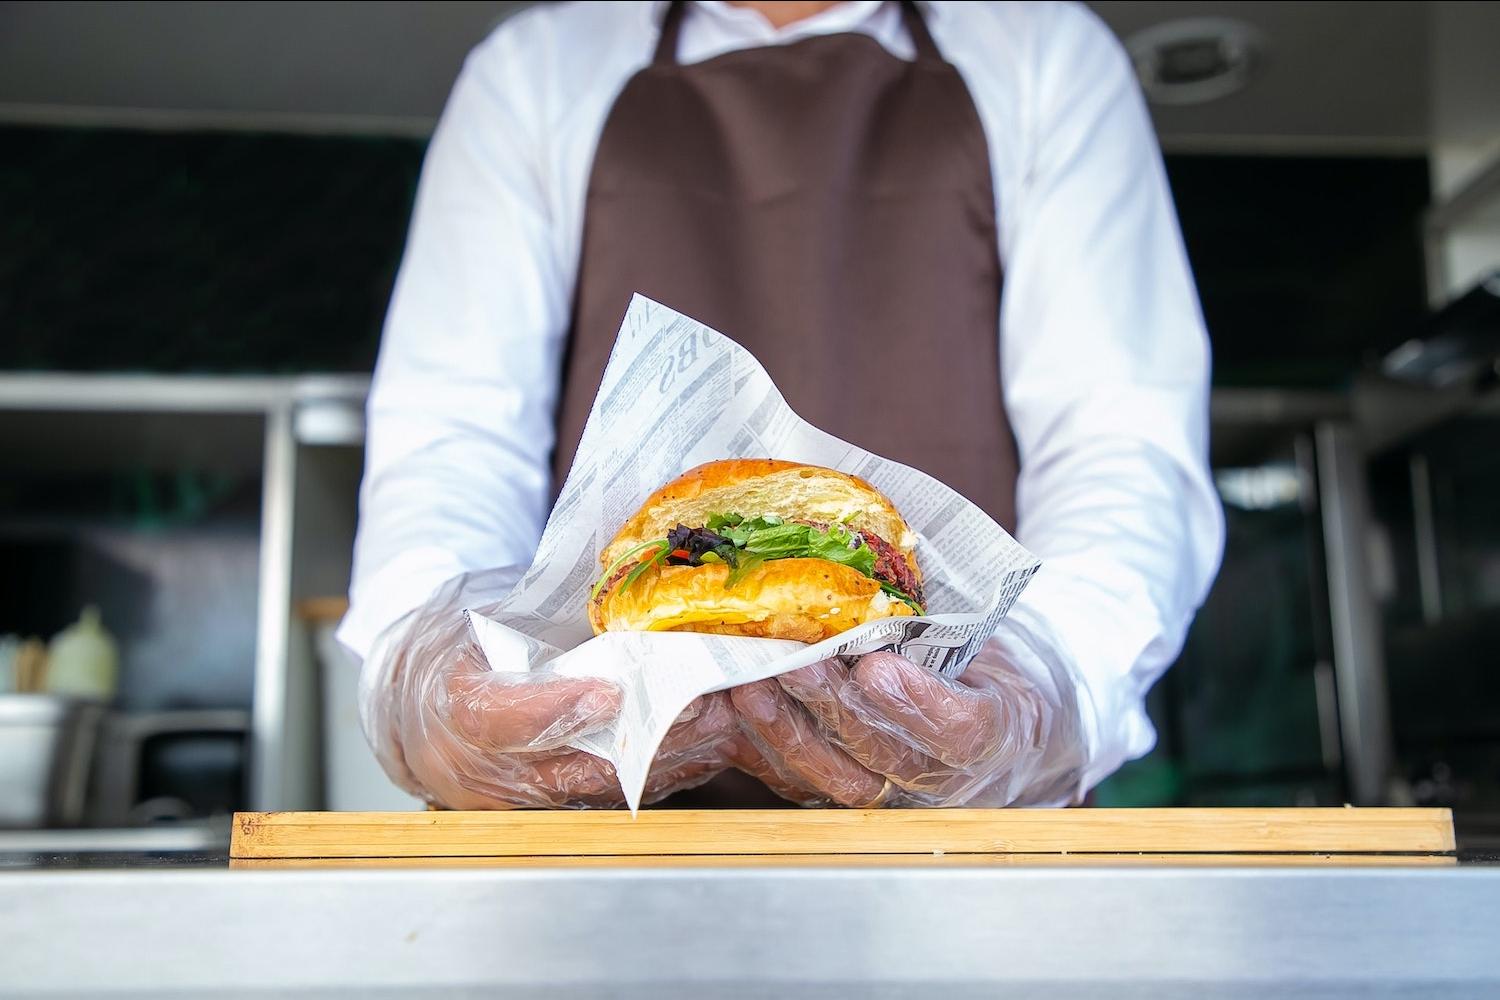 food cart owner holding burger in a wrapper